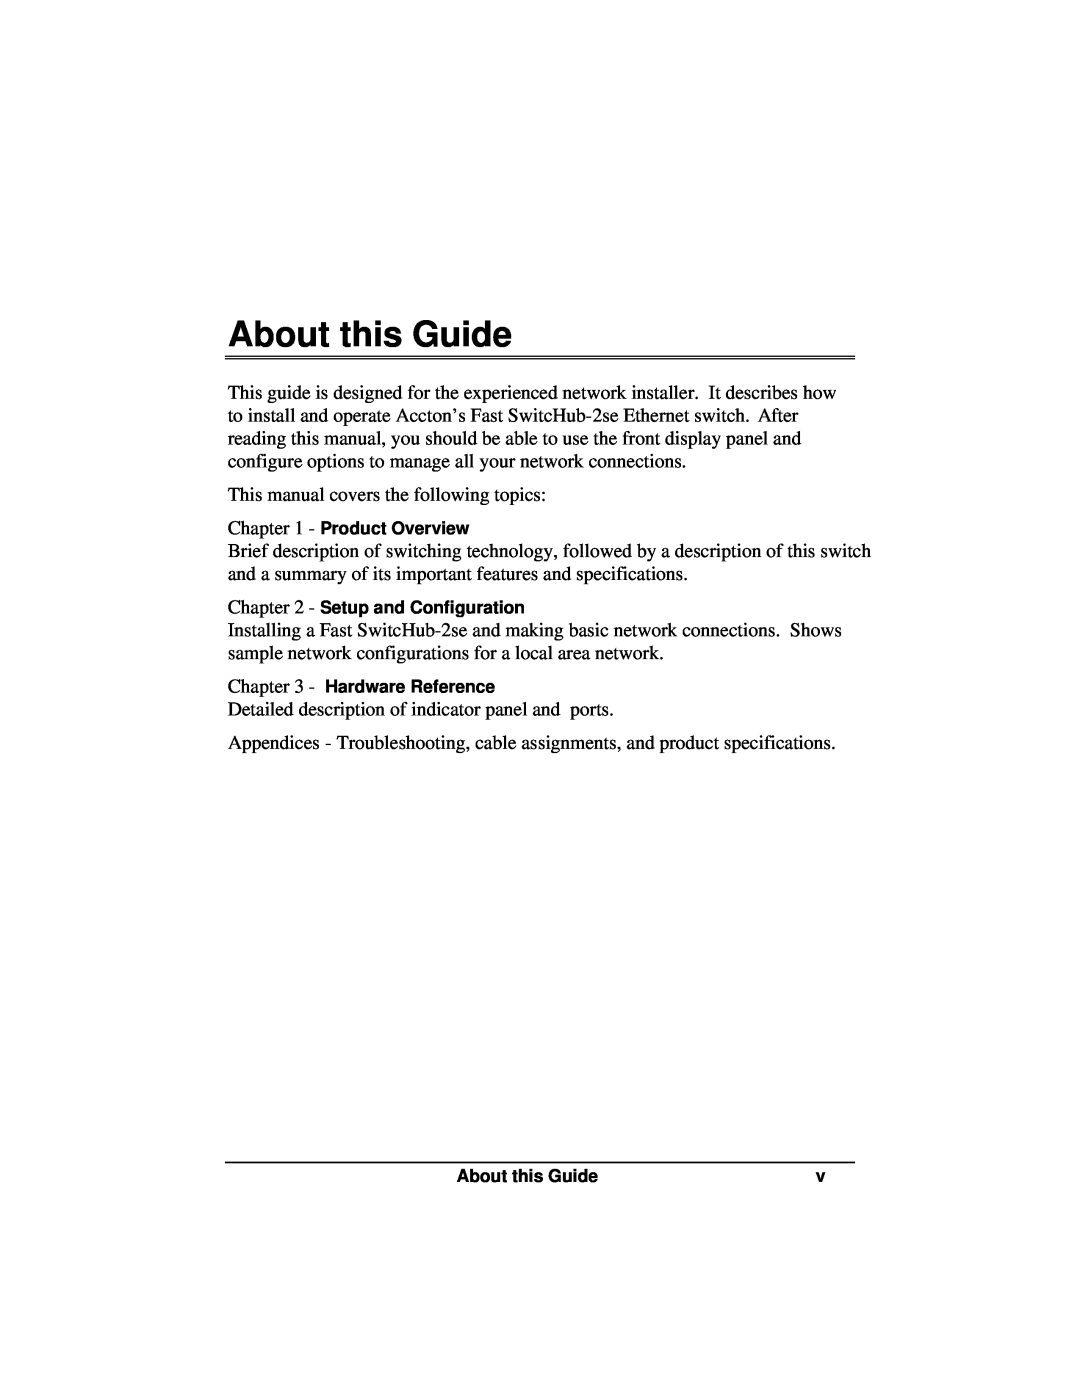 Accton Technology ES3002-TF manual About this Guide 